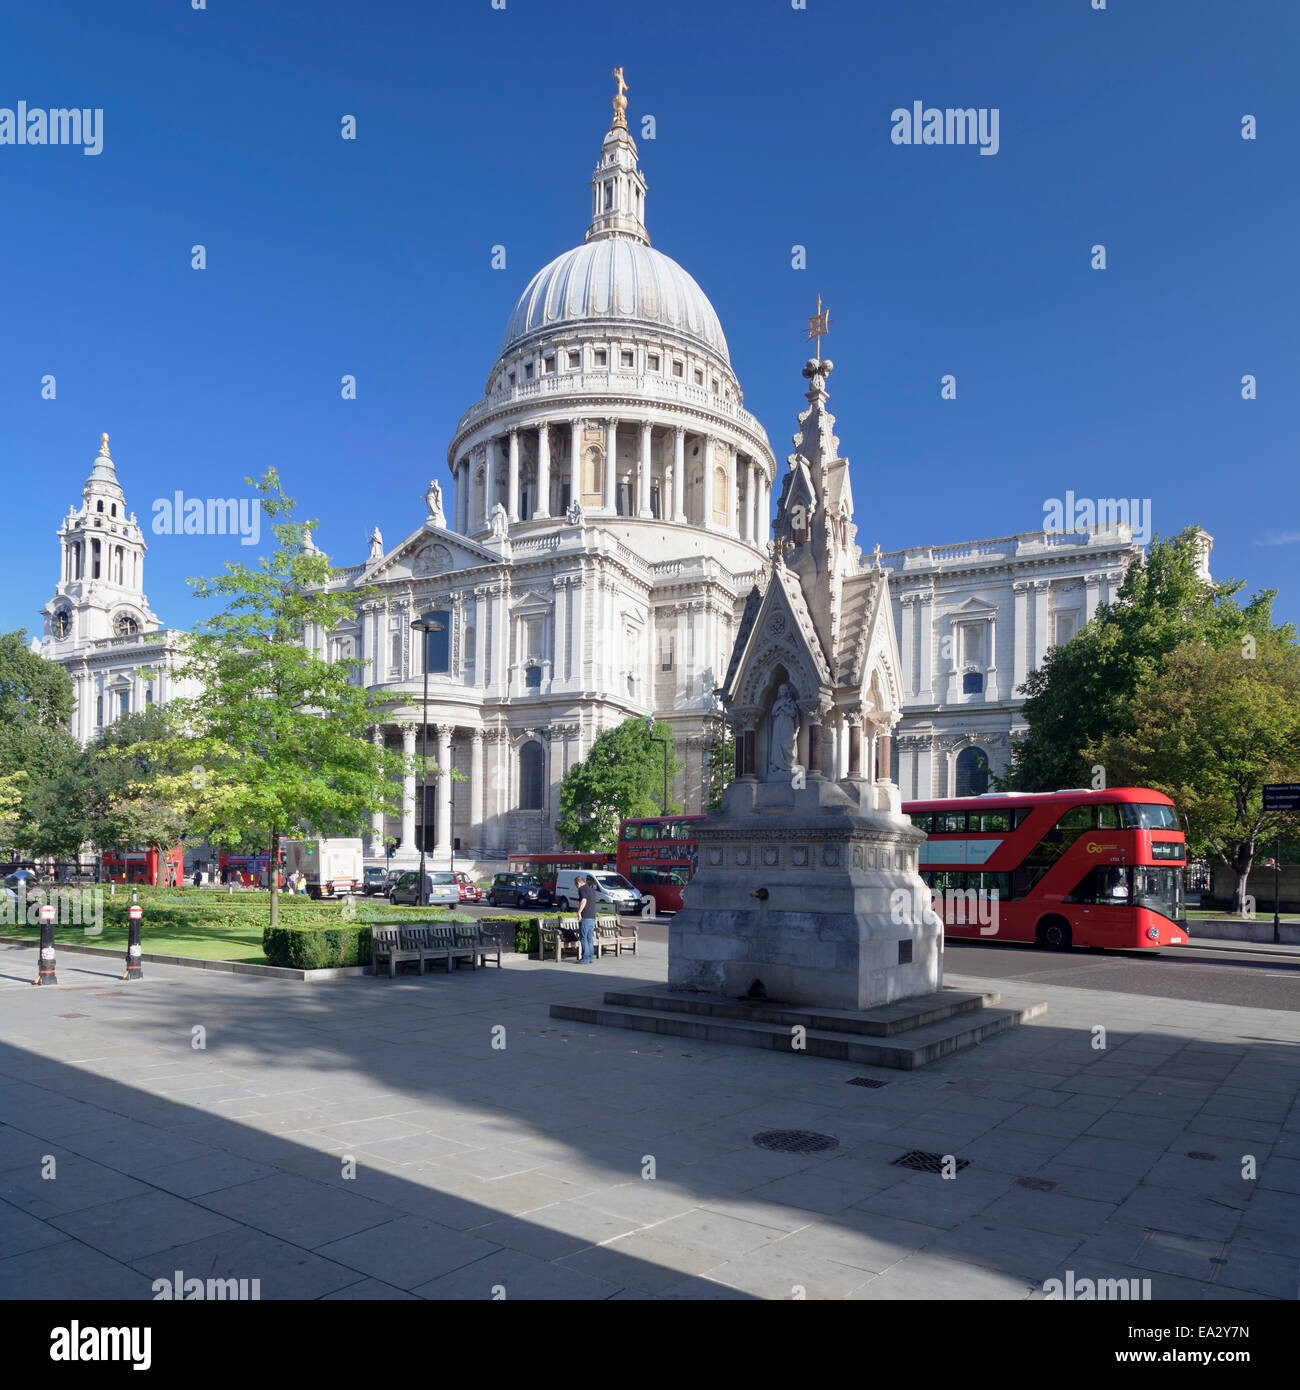 St. Paul's Cathedral, and red double decker bus, London, England, United Kingdom, Europe Stock Photo